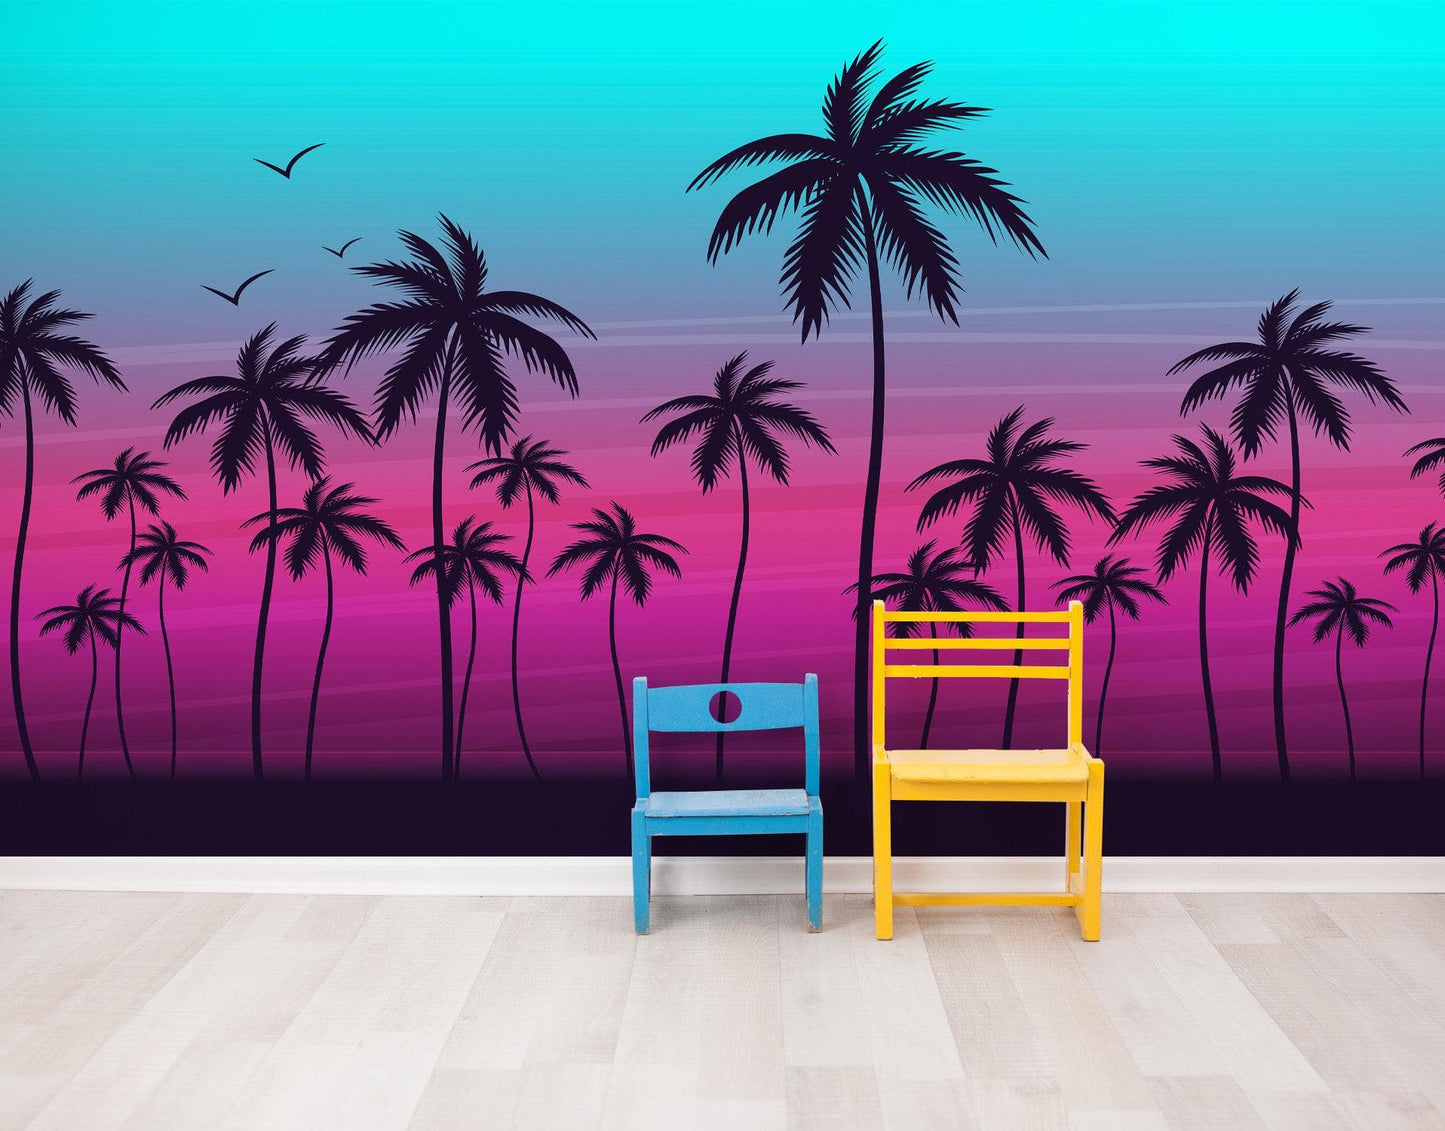 Miami Tropical Palm Tree Illustration Vice Color Sunset Wall Mural. Bright Miami Vice Blue and Fuchsia Colors. #6331